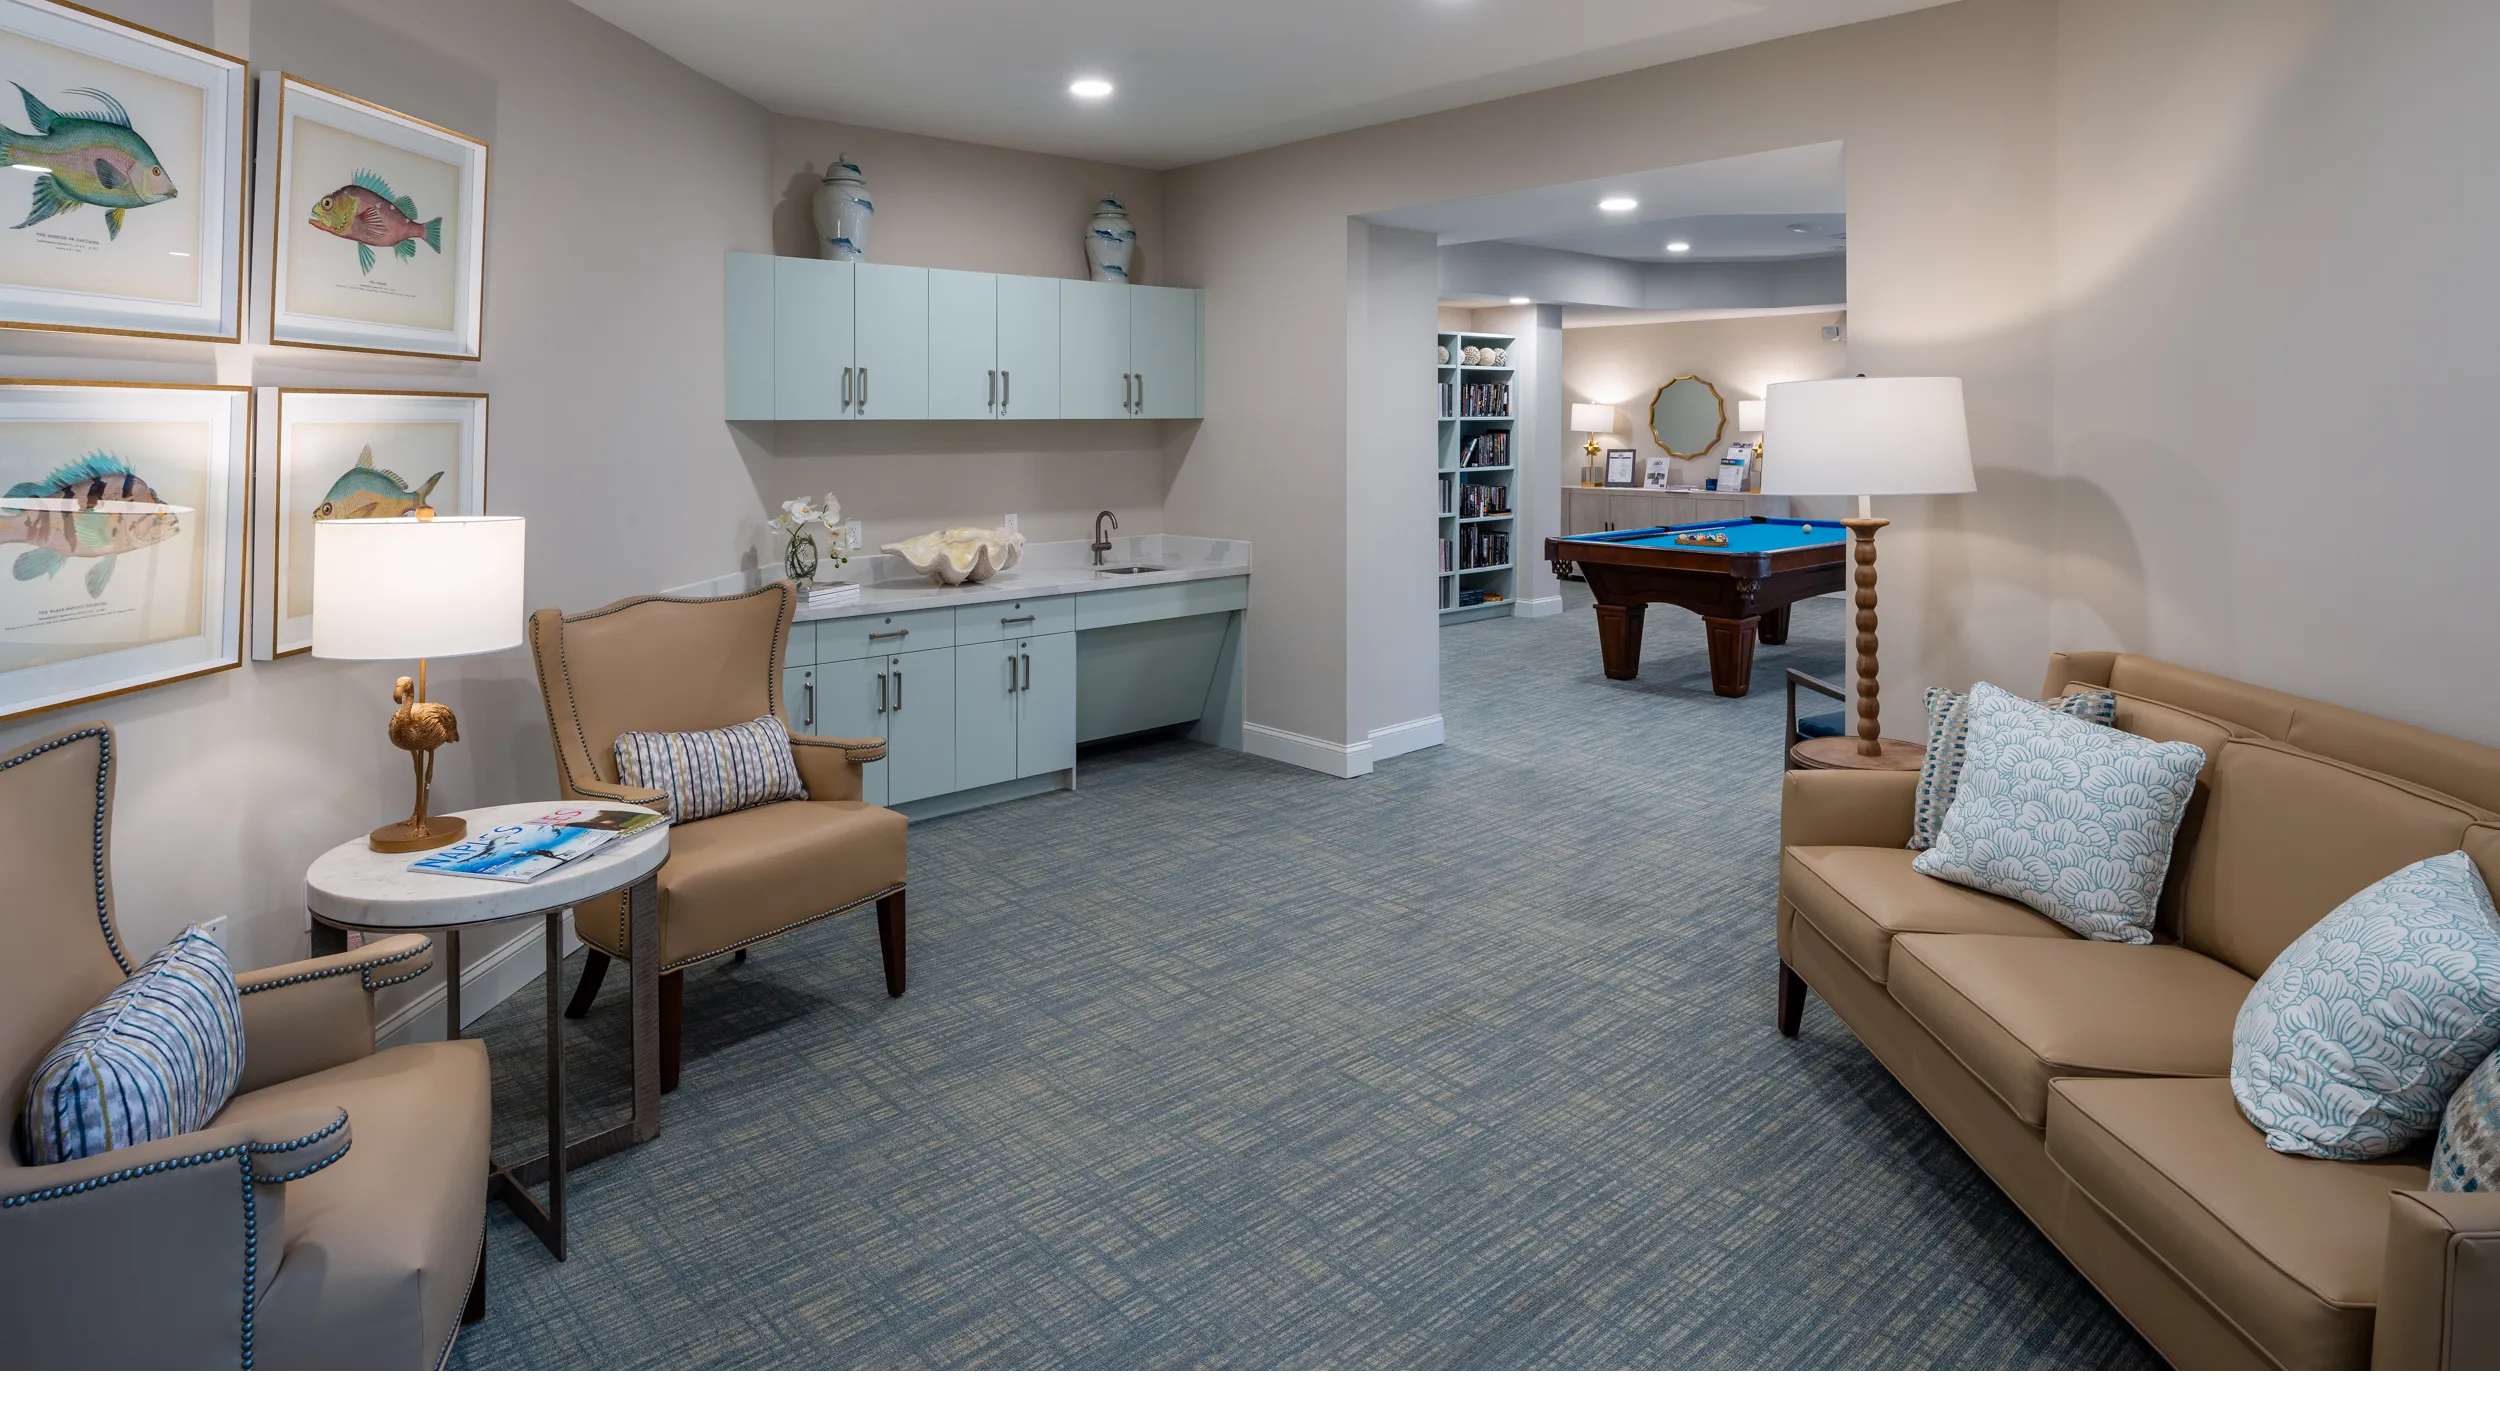 lounge with pool table and bookshelves at senior living apartments